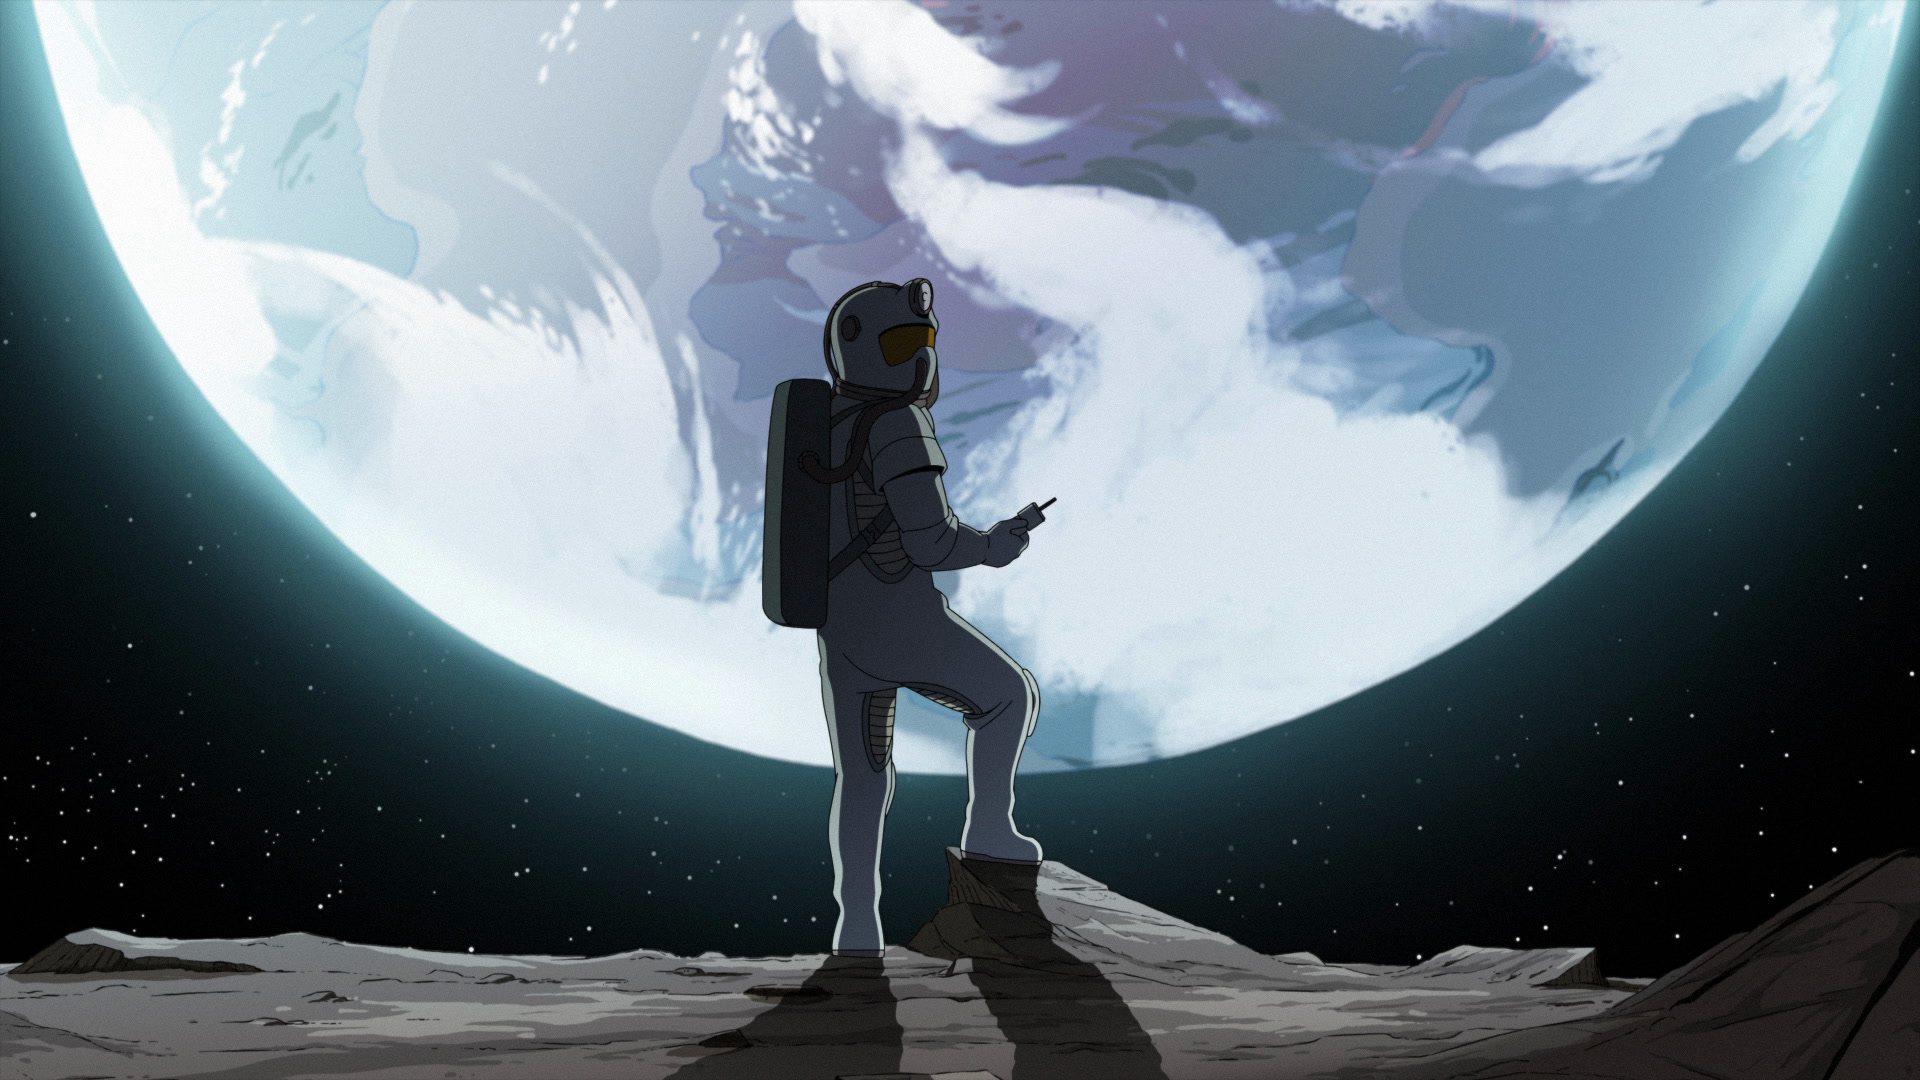 An astronaut stands on a moon with a planet looming in front of him in the animated series Scavengers Reign